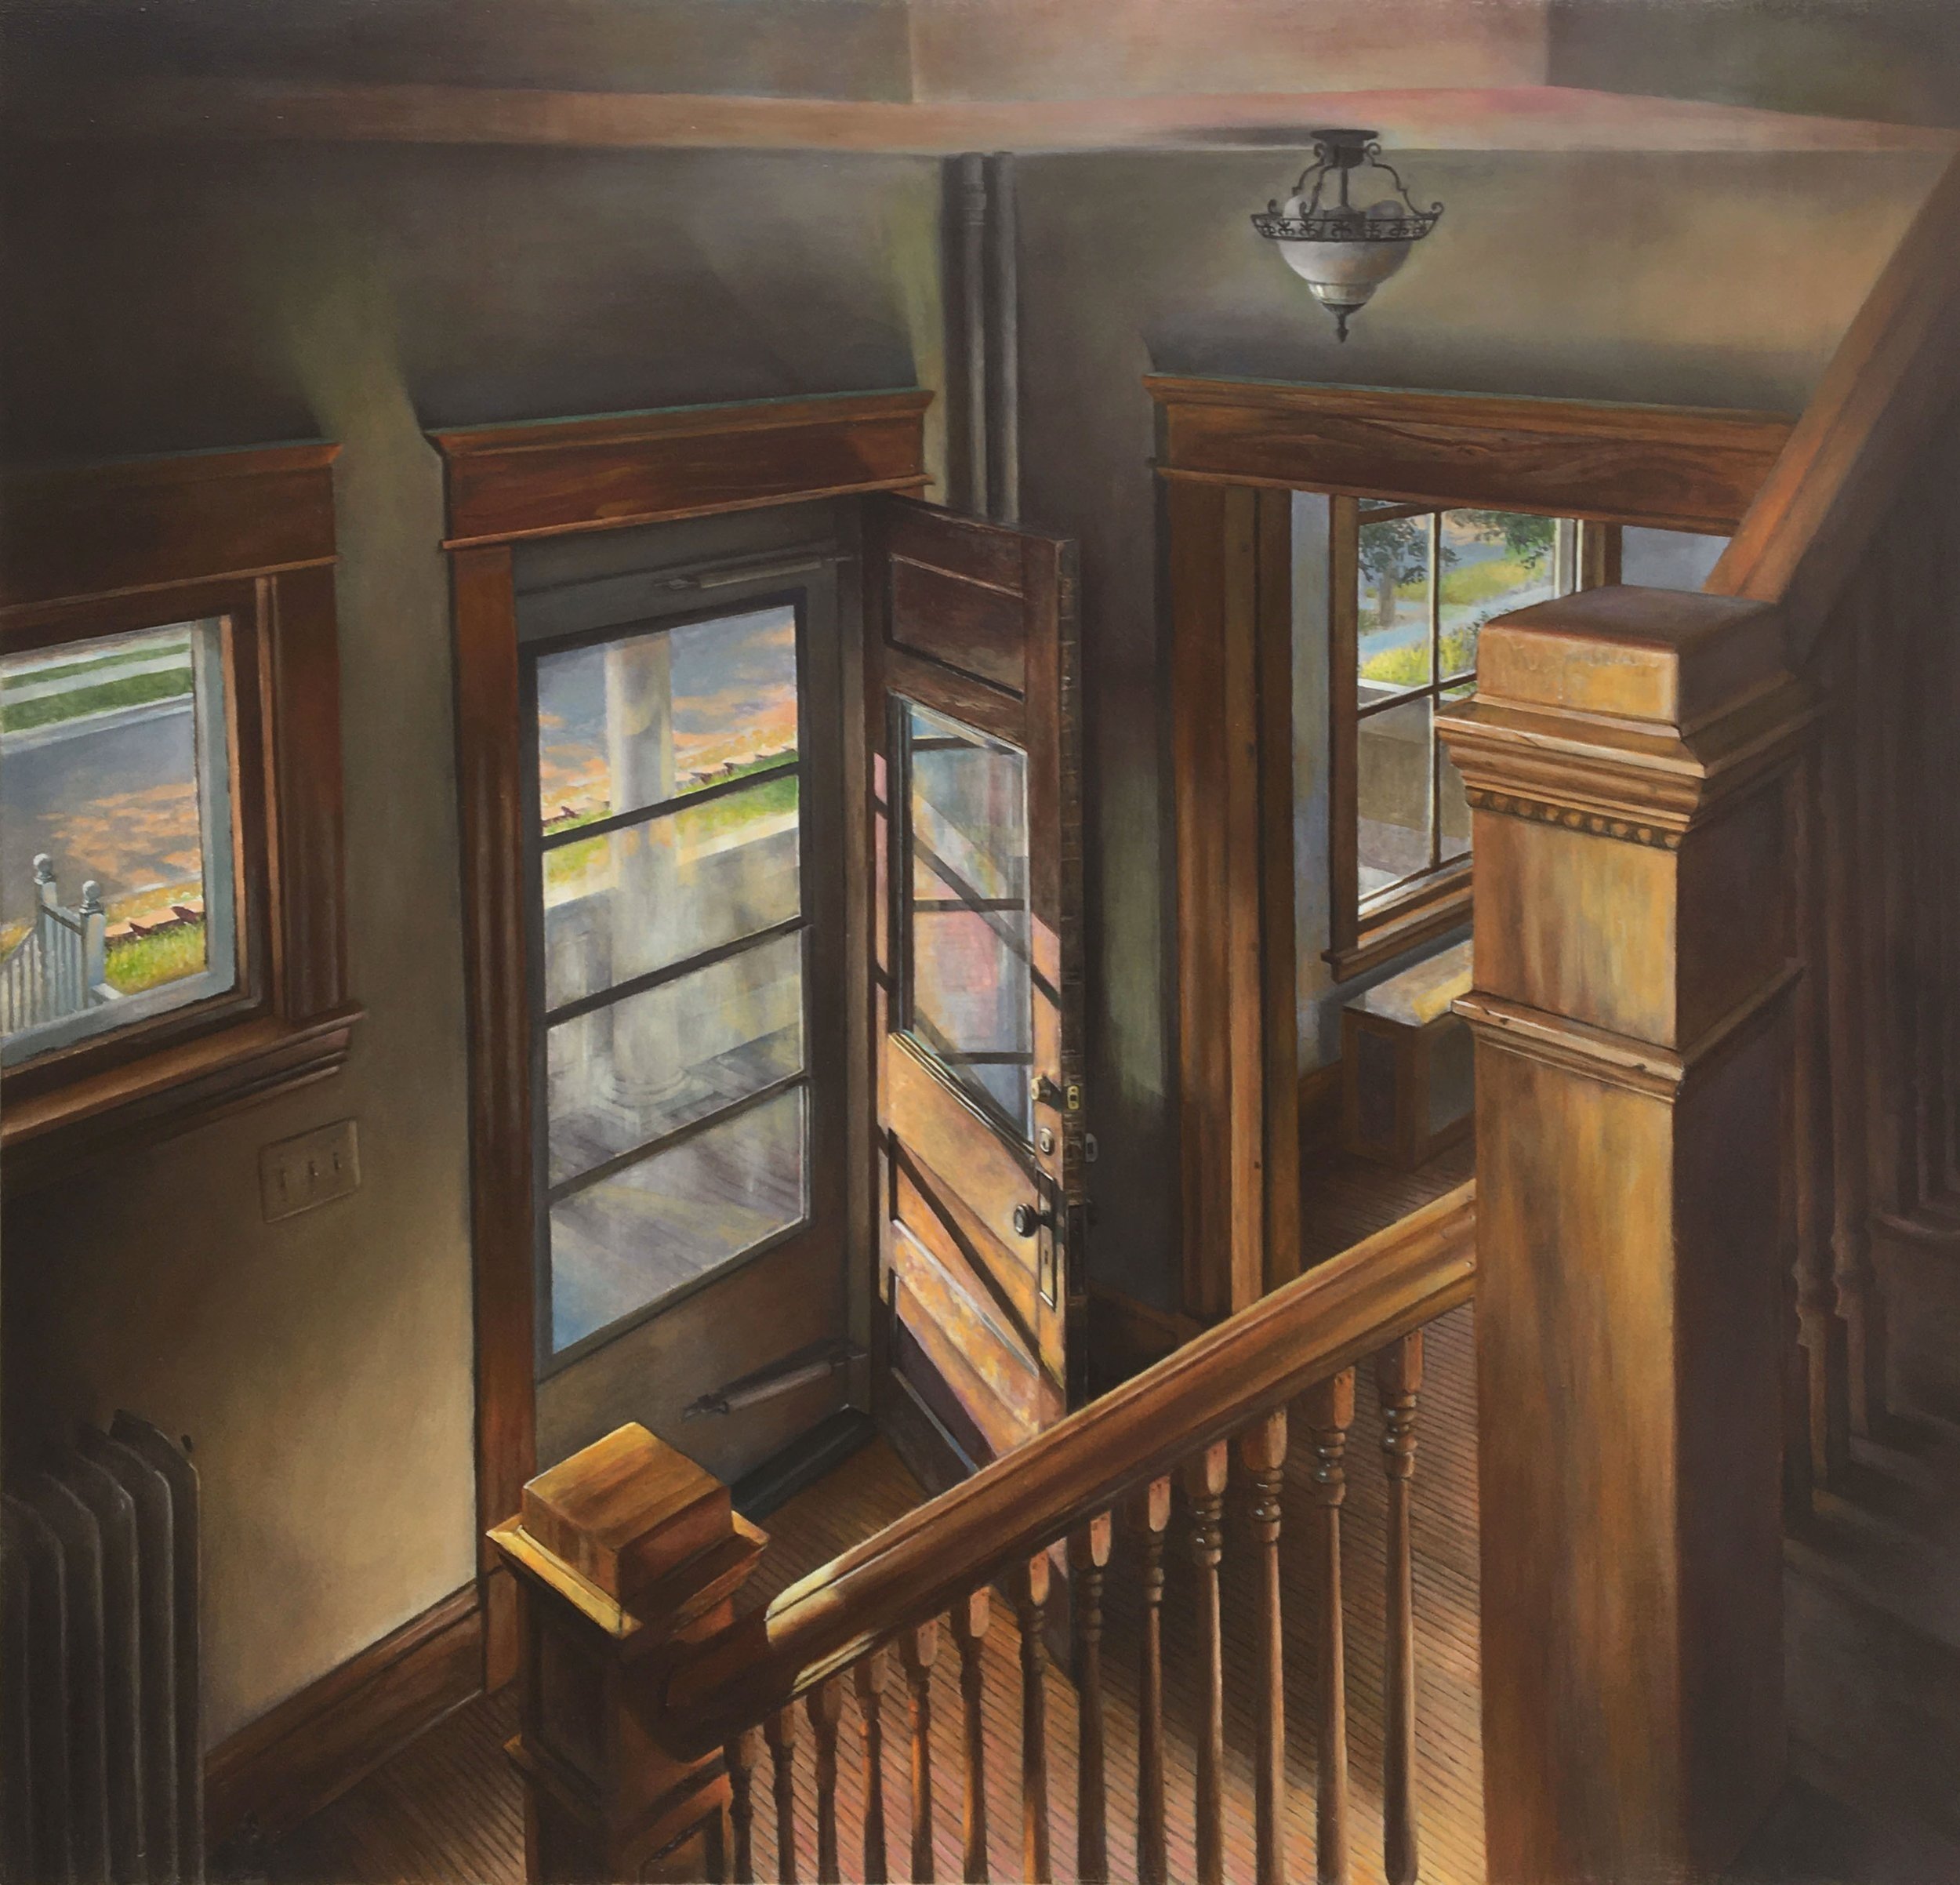   Foyer   2022  Oil on linen over panel  35 x 36 inches   